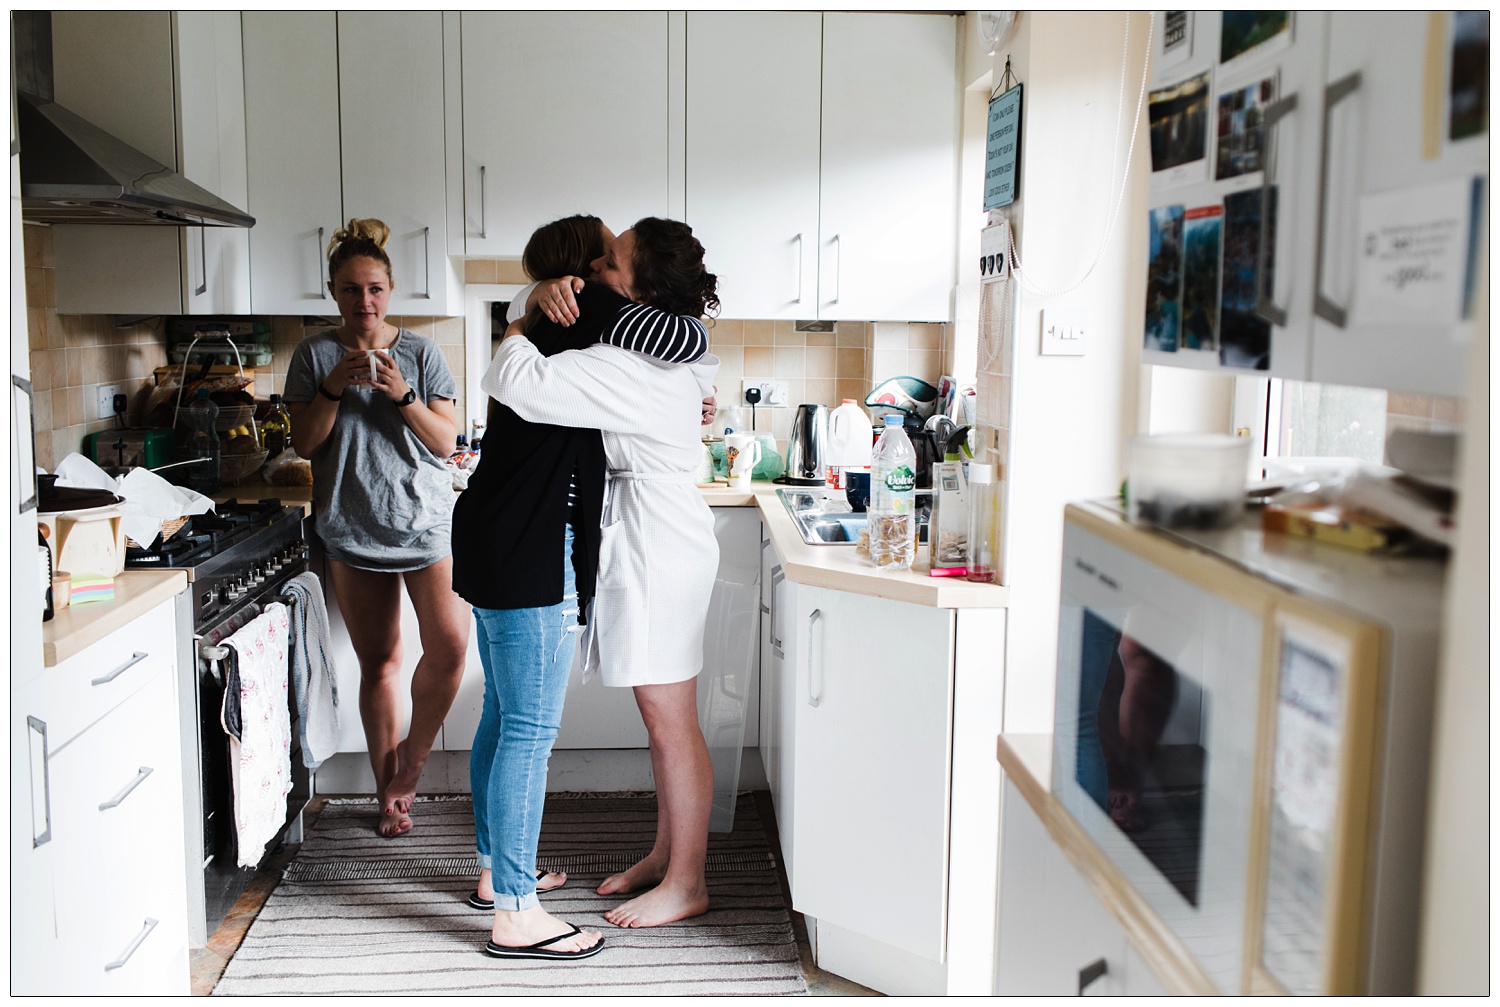 Women in a kitchen on the morning of a wedding. The bride hugs another woman.